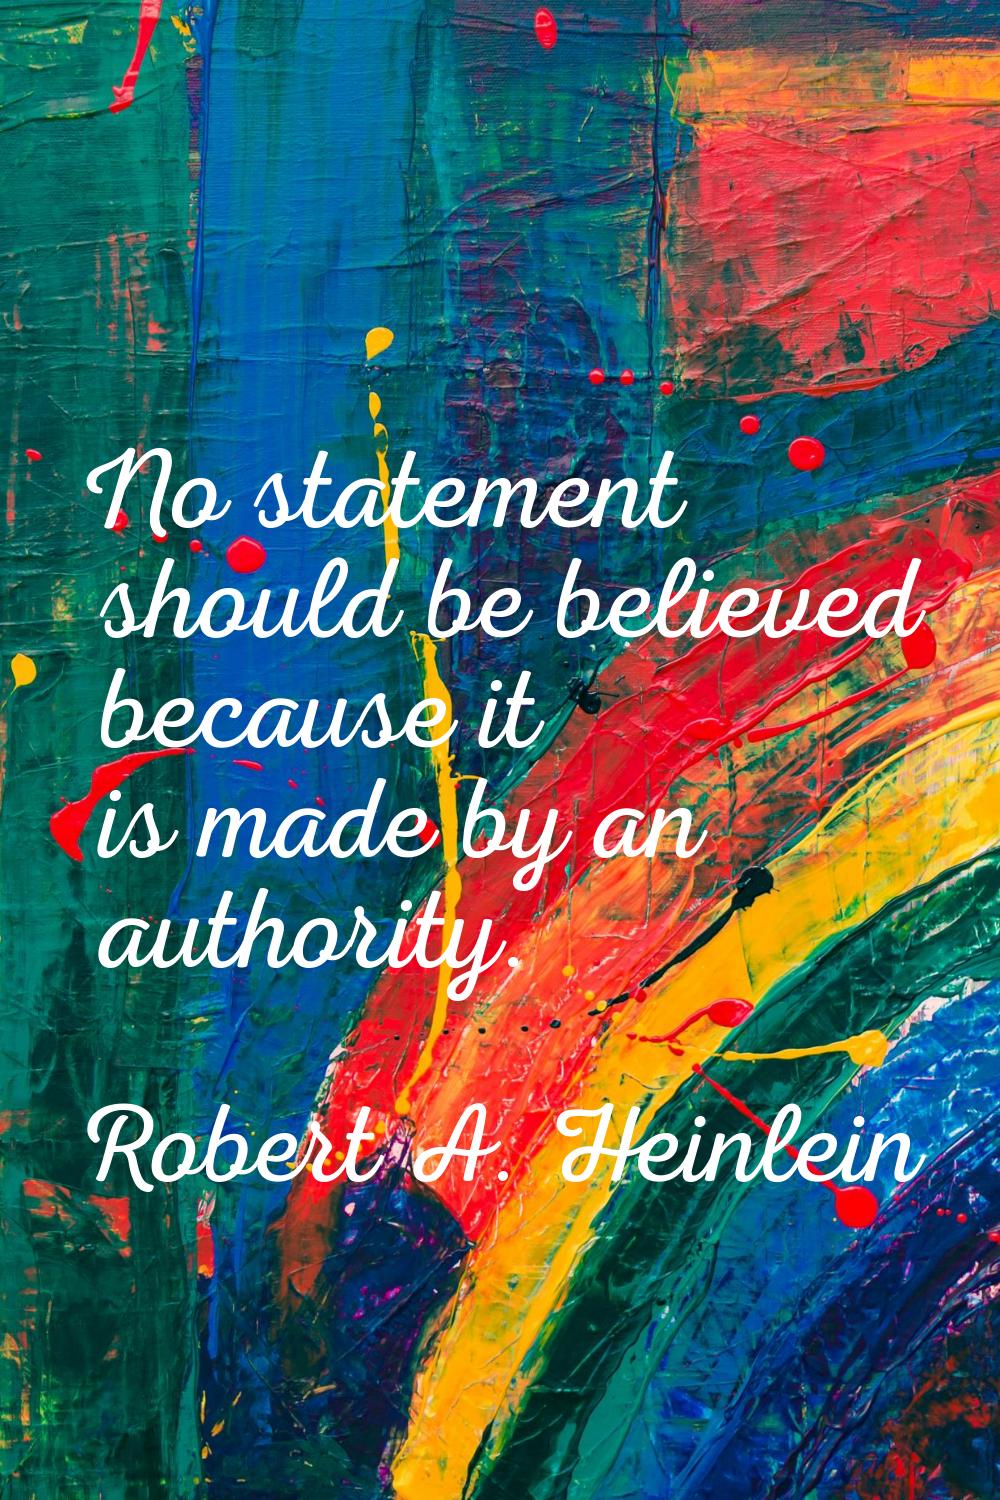 No statement should be believed because it is made by an authority.